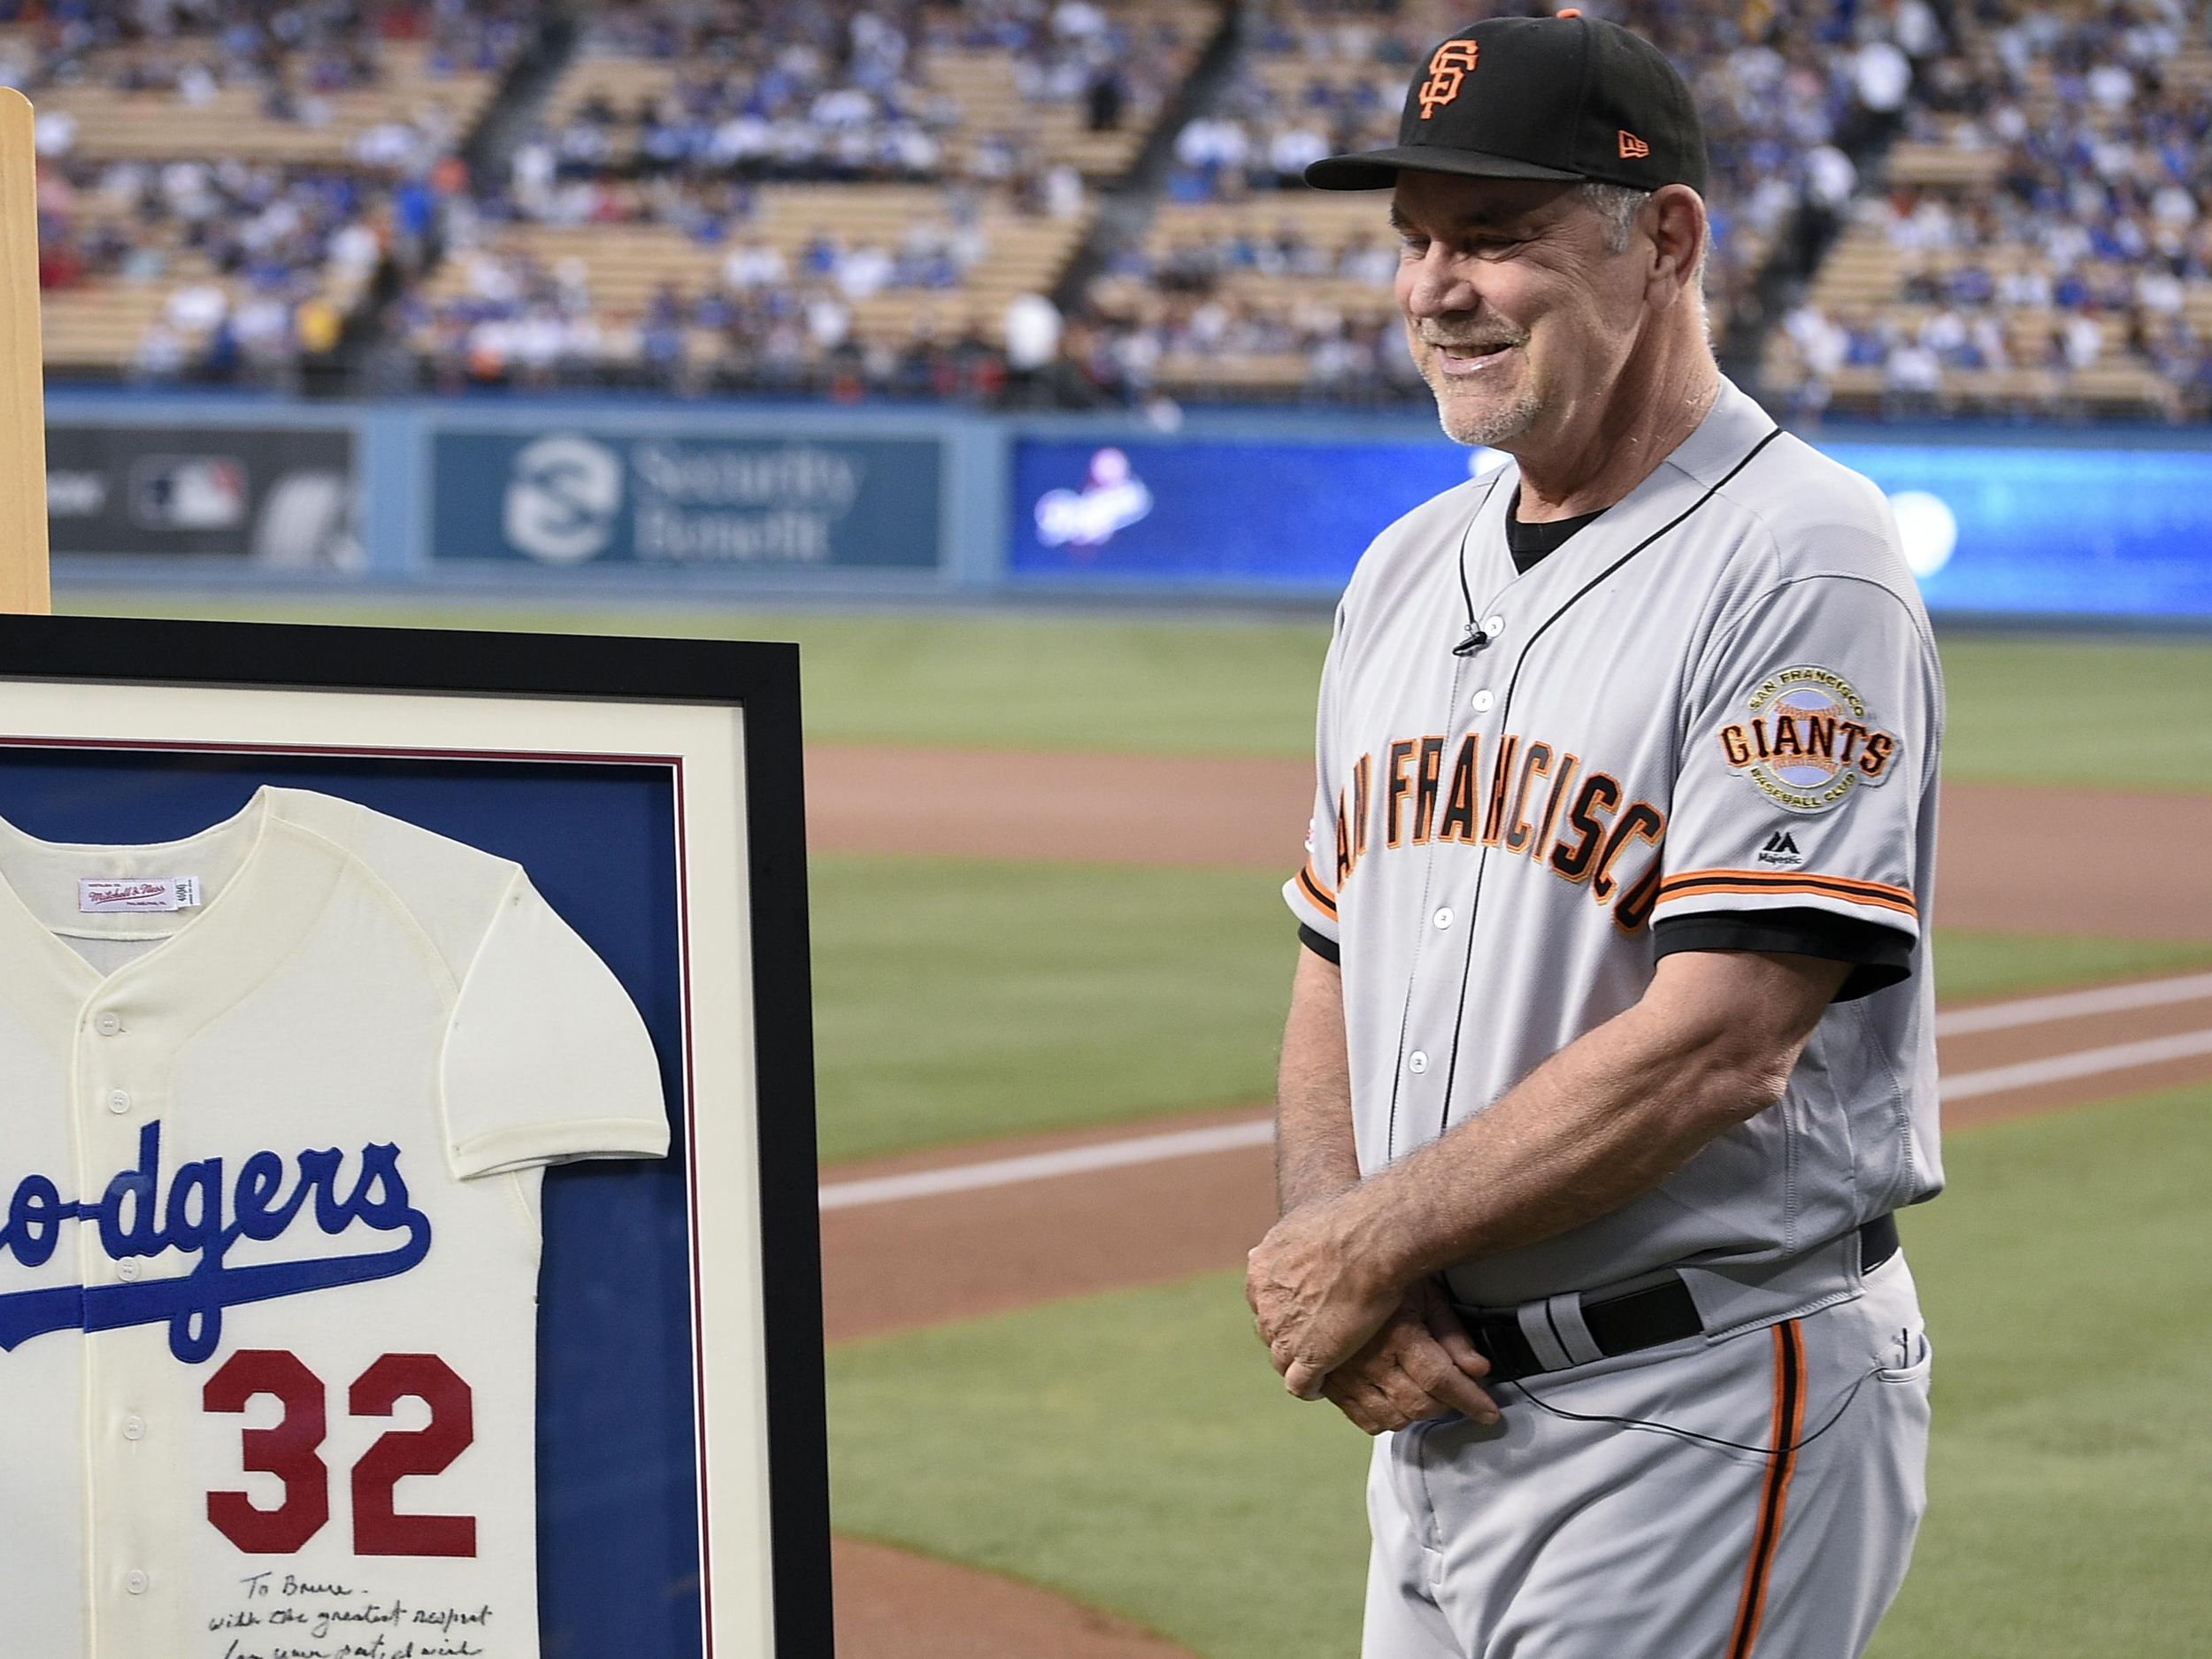 Dodgers fete Giants manager Bruce Bochy in final visit to L.A.